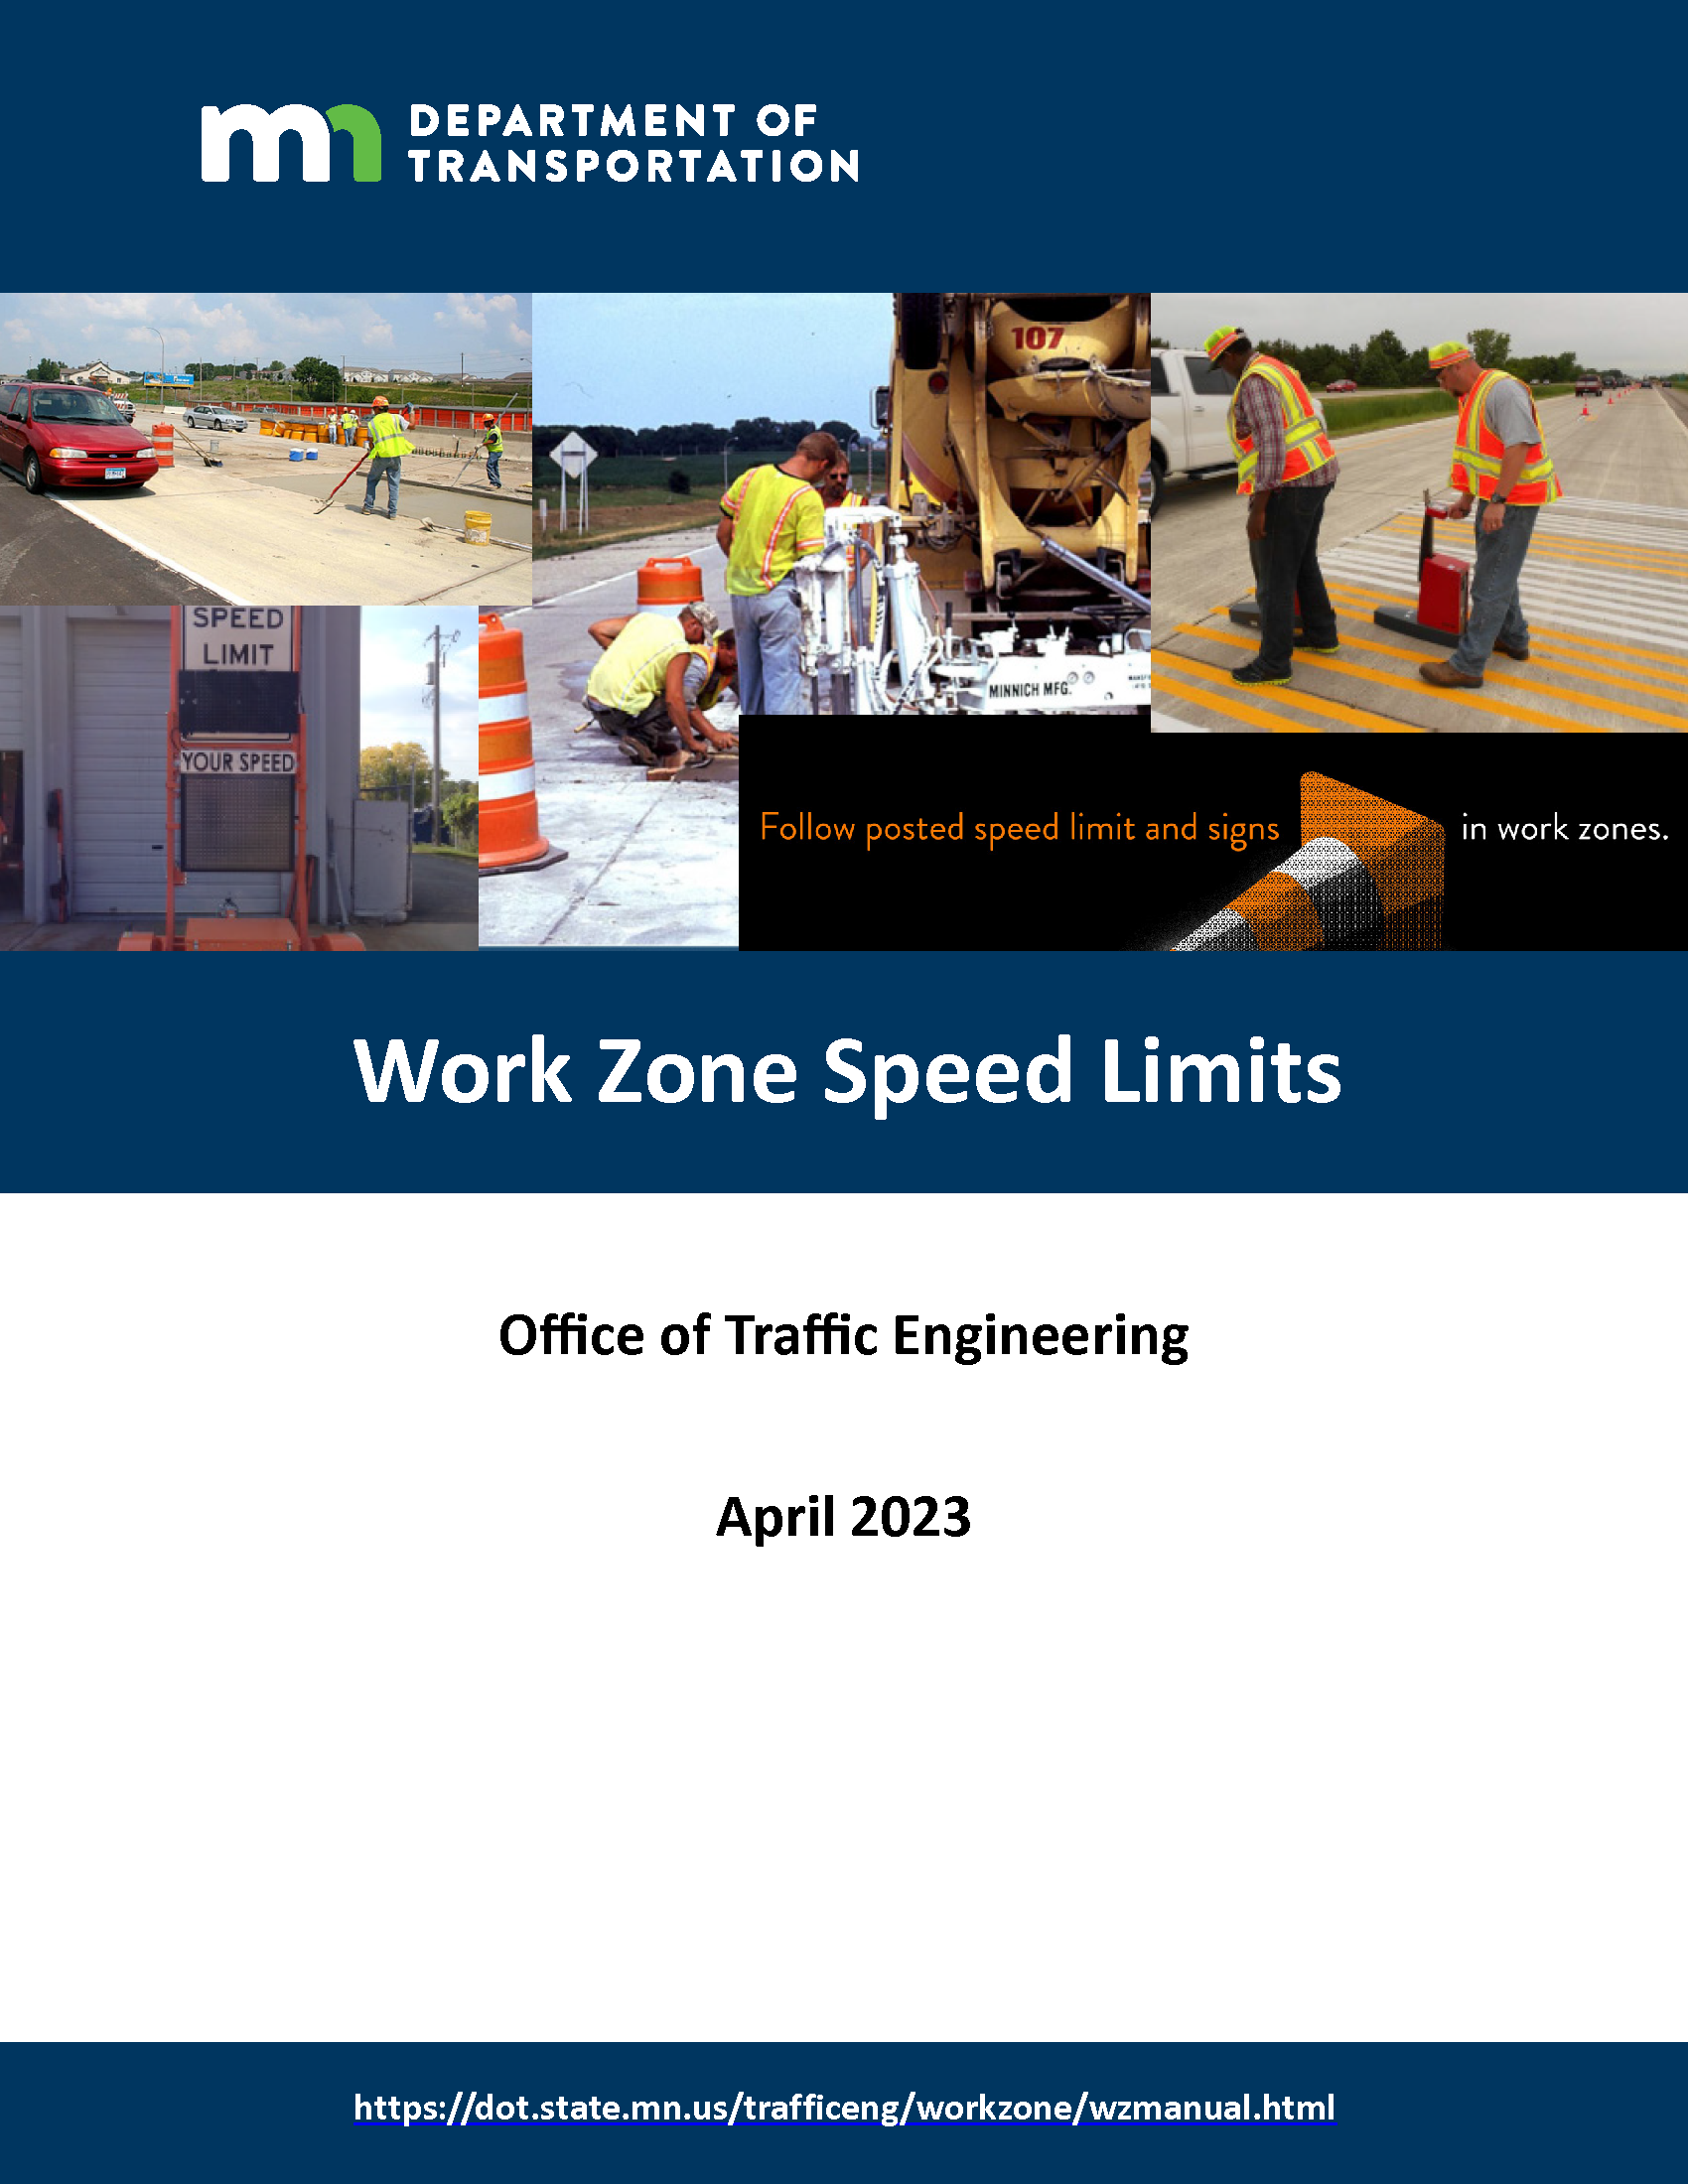 speed limits in work zones guidelines manual cover